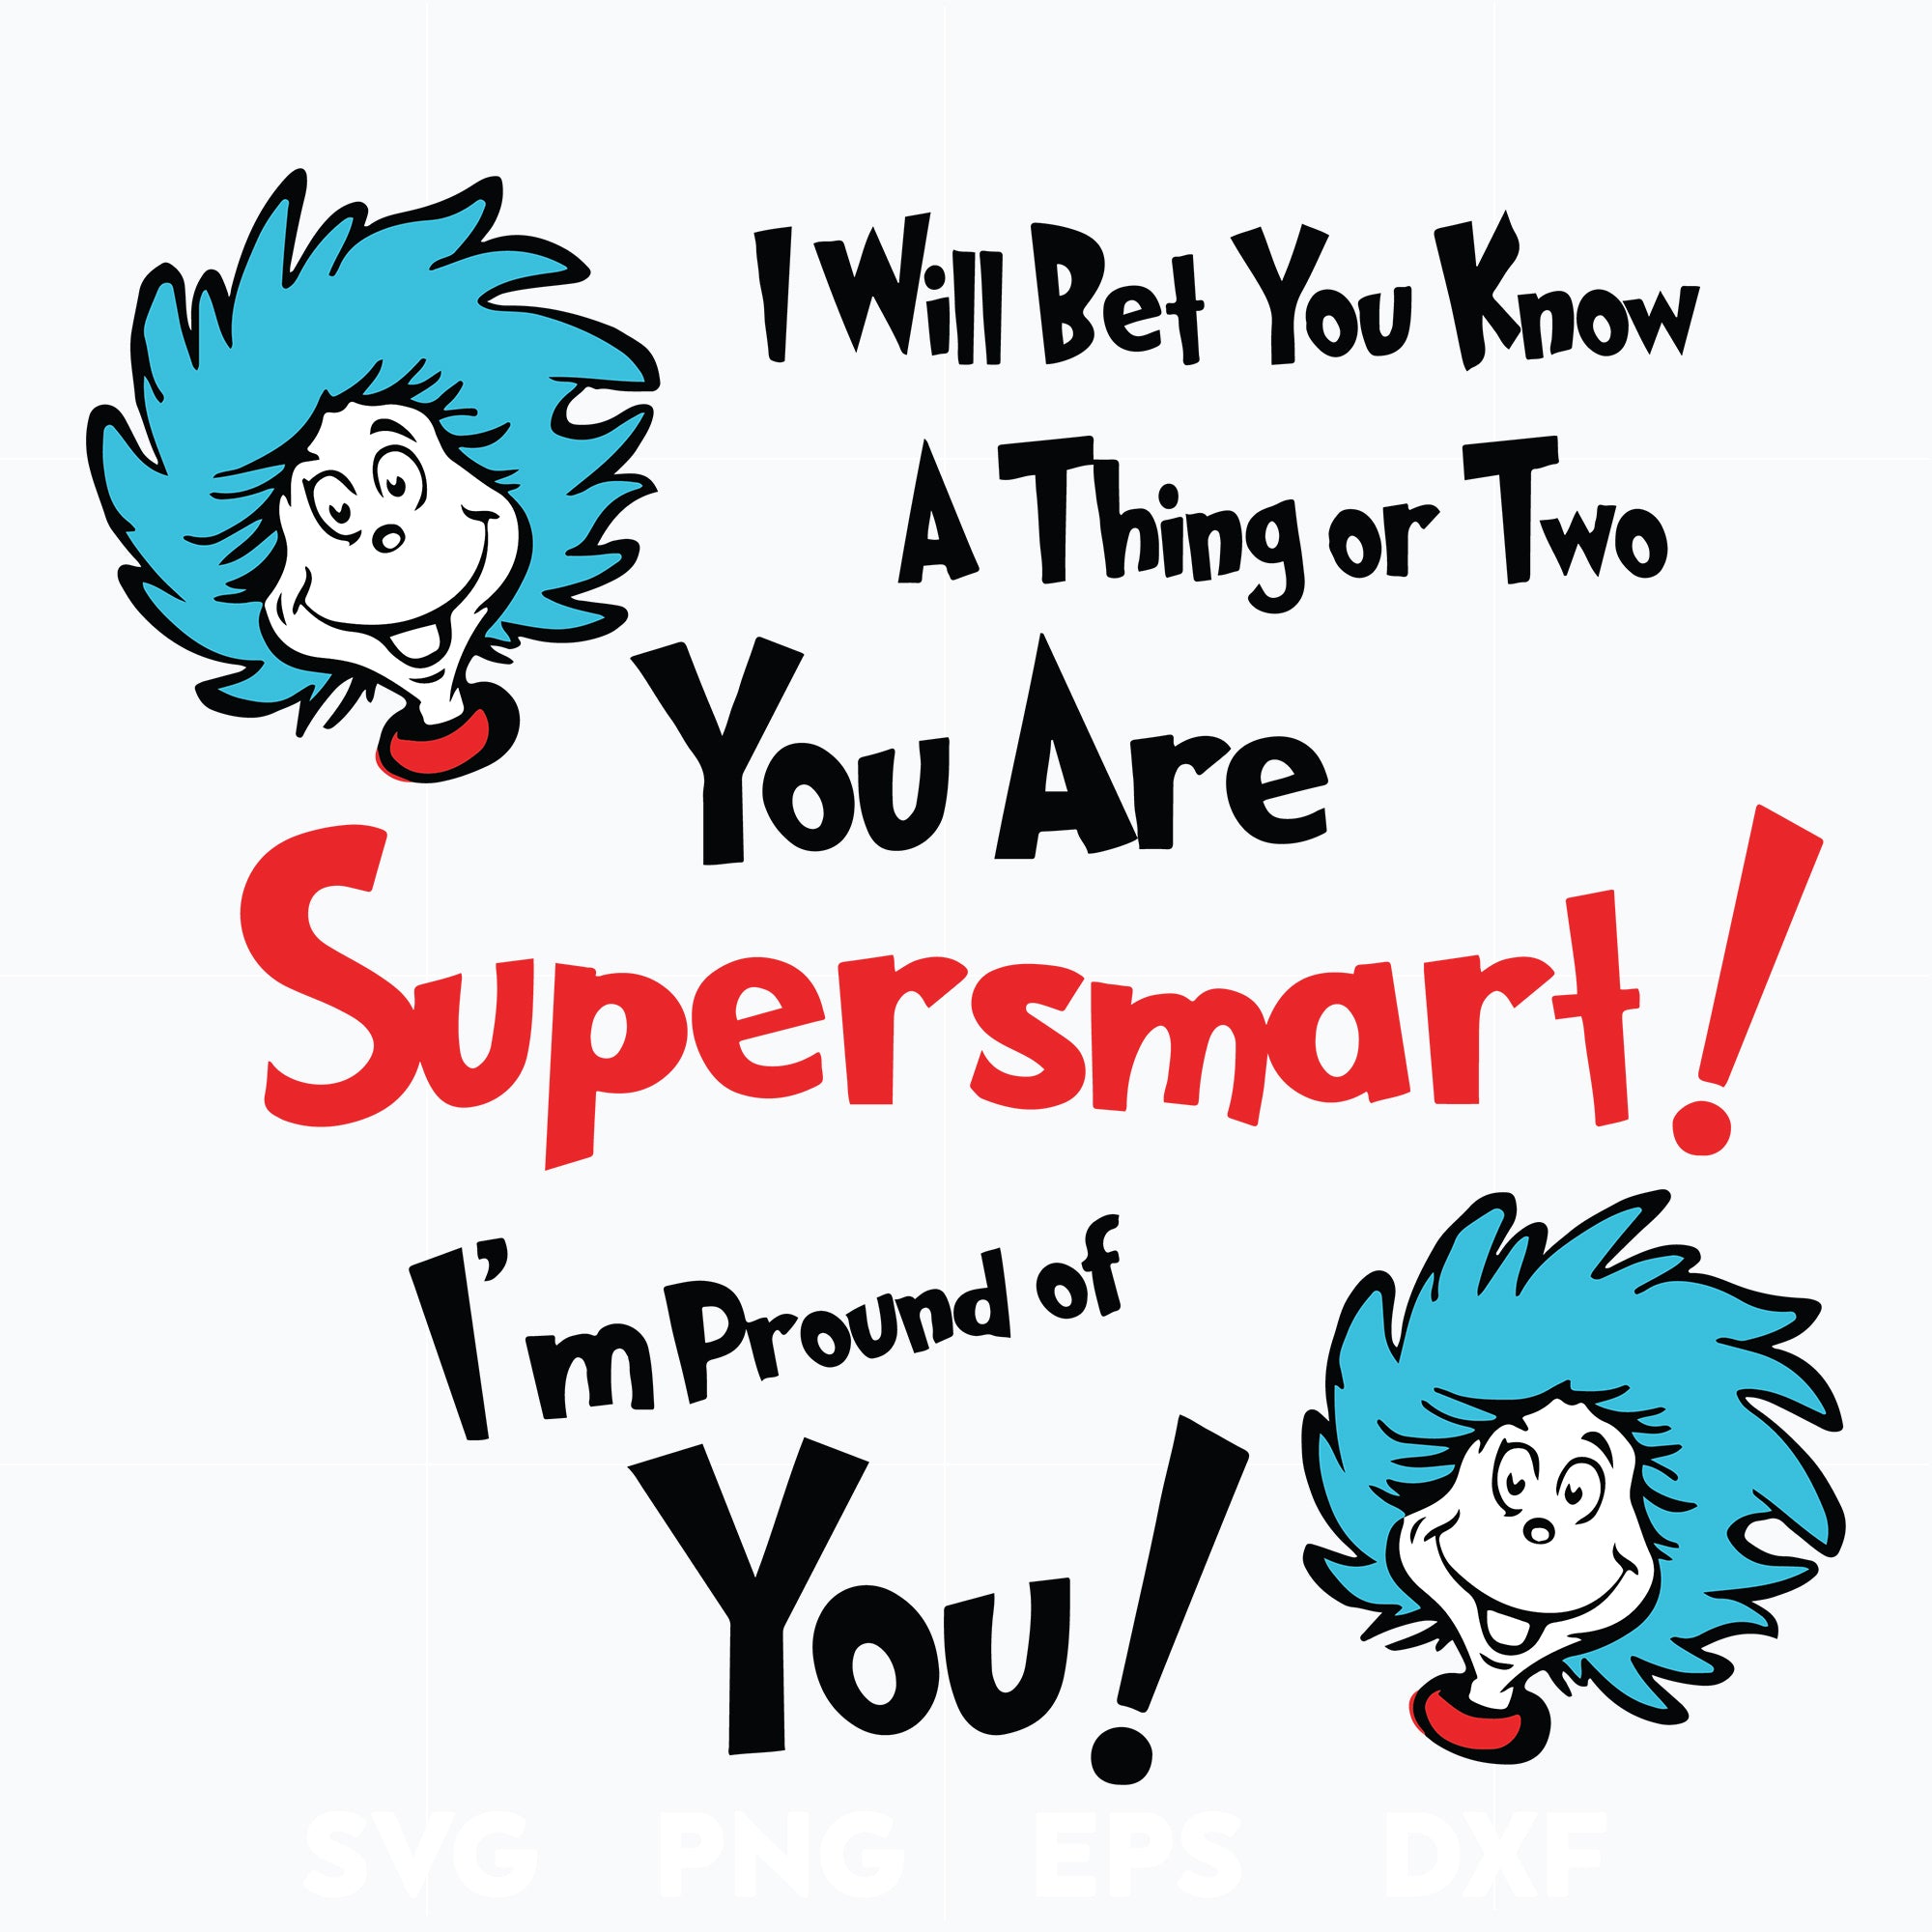 I'll bet you know a thing or two you are supersmart, dr seuss svg, png, dxf, eps digital file